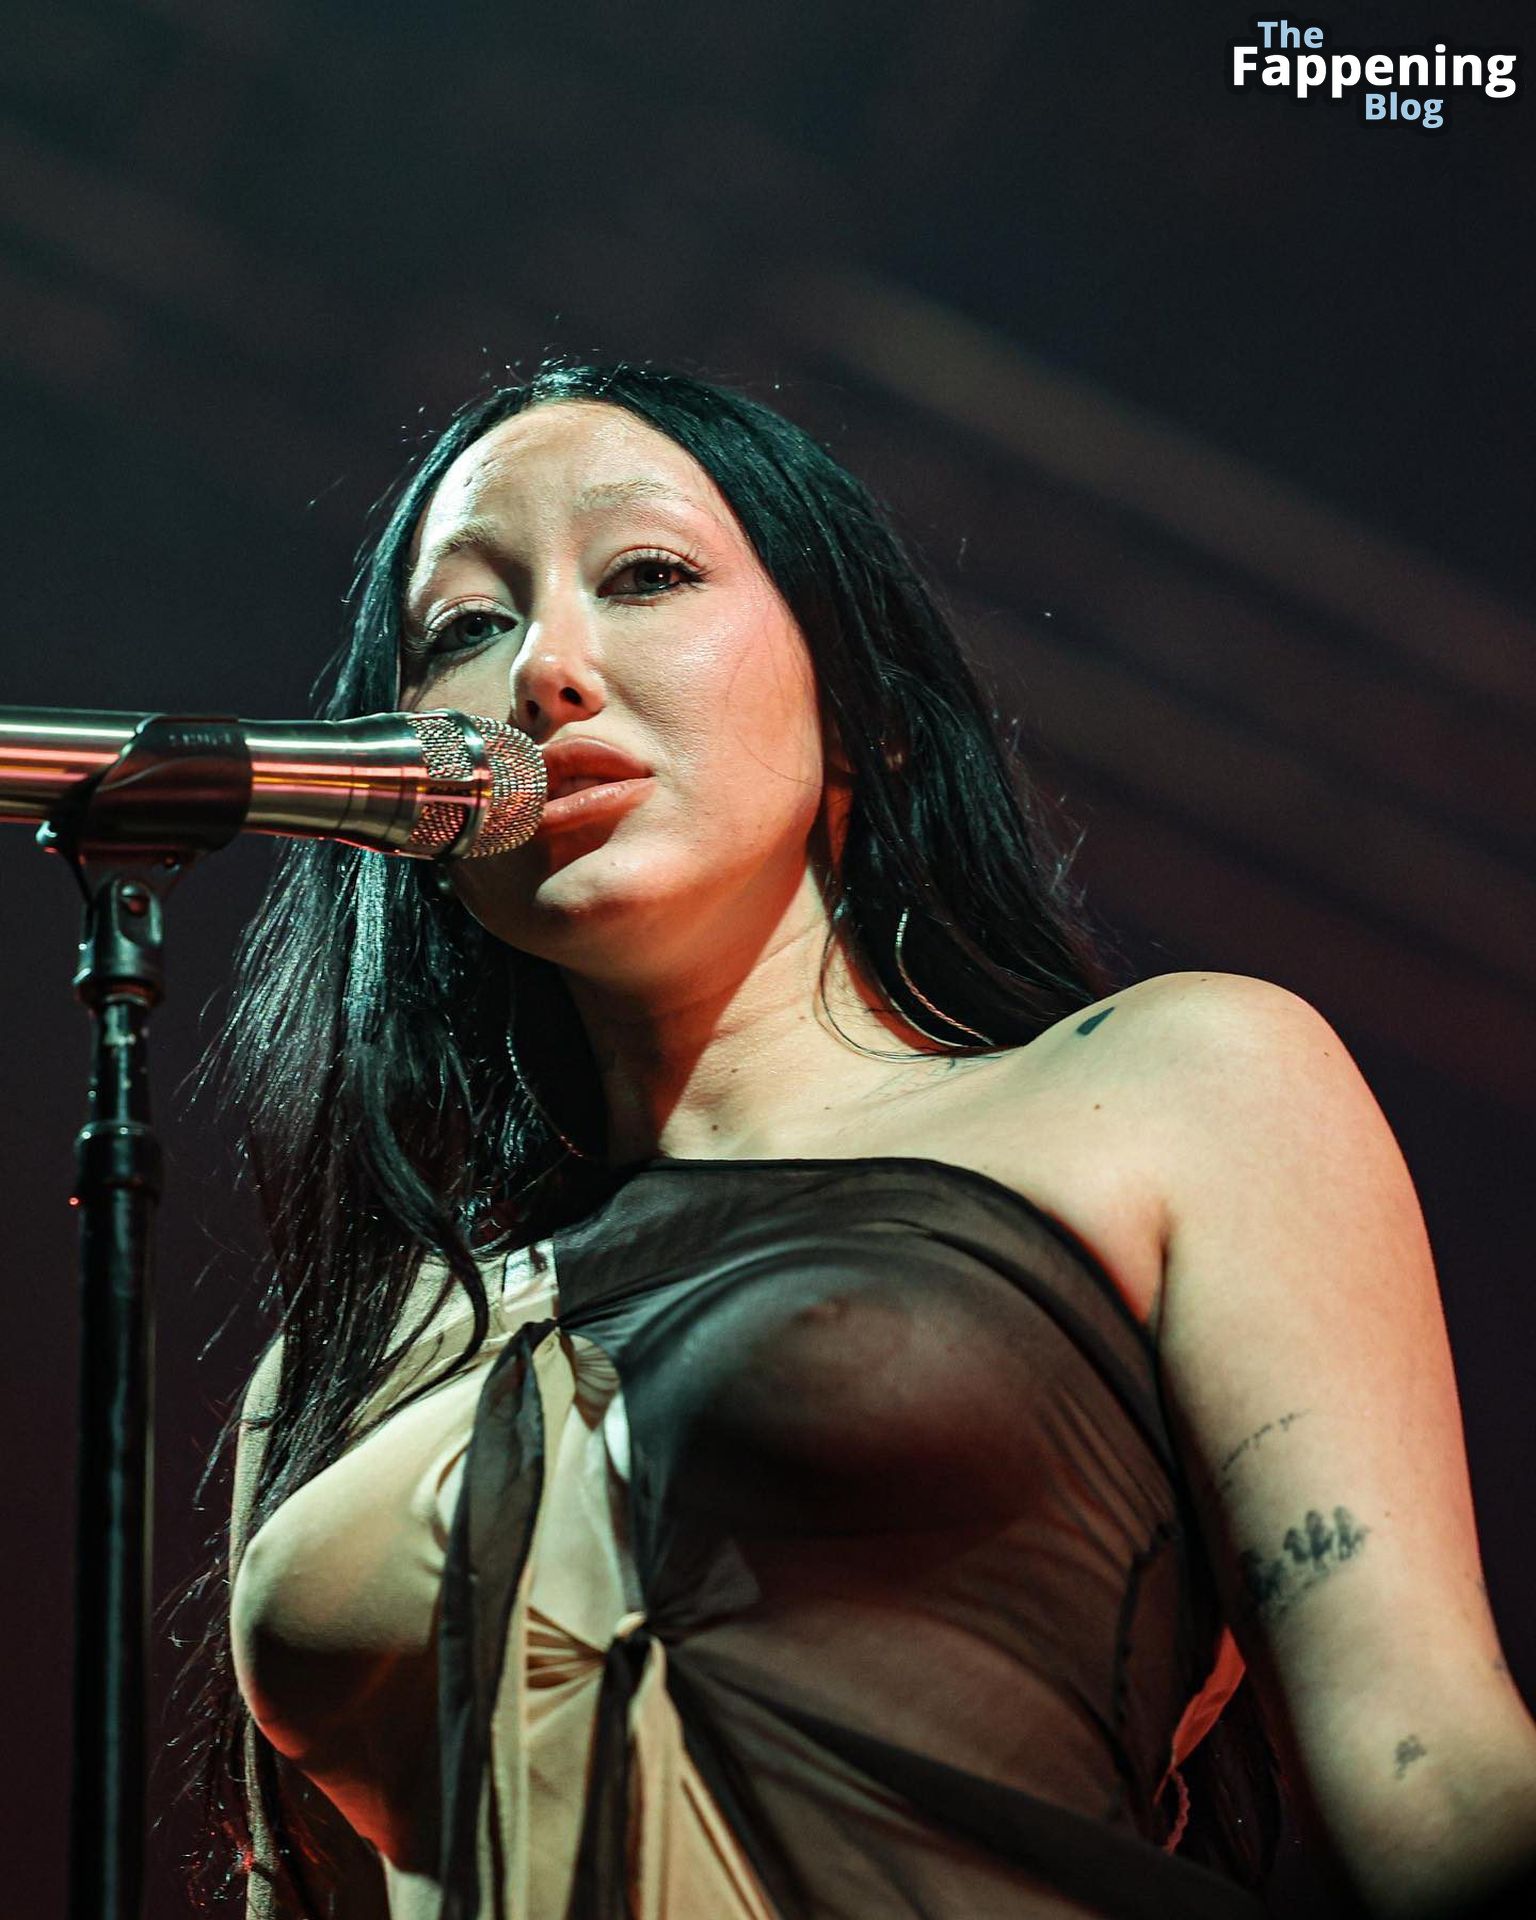 Noah Cyrus Displays Her Nude Boobs on Stage at the Splendour in the Grass Music Festival in Australia (15 Photos)